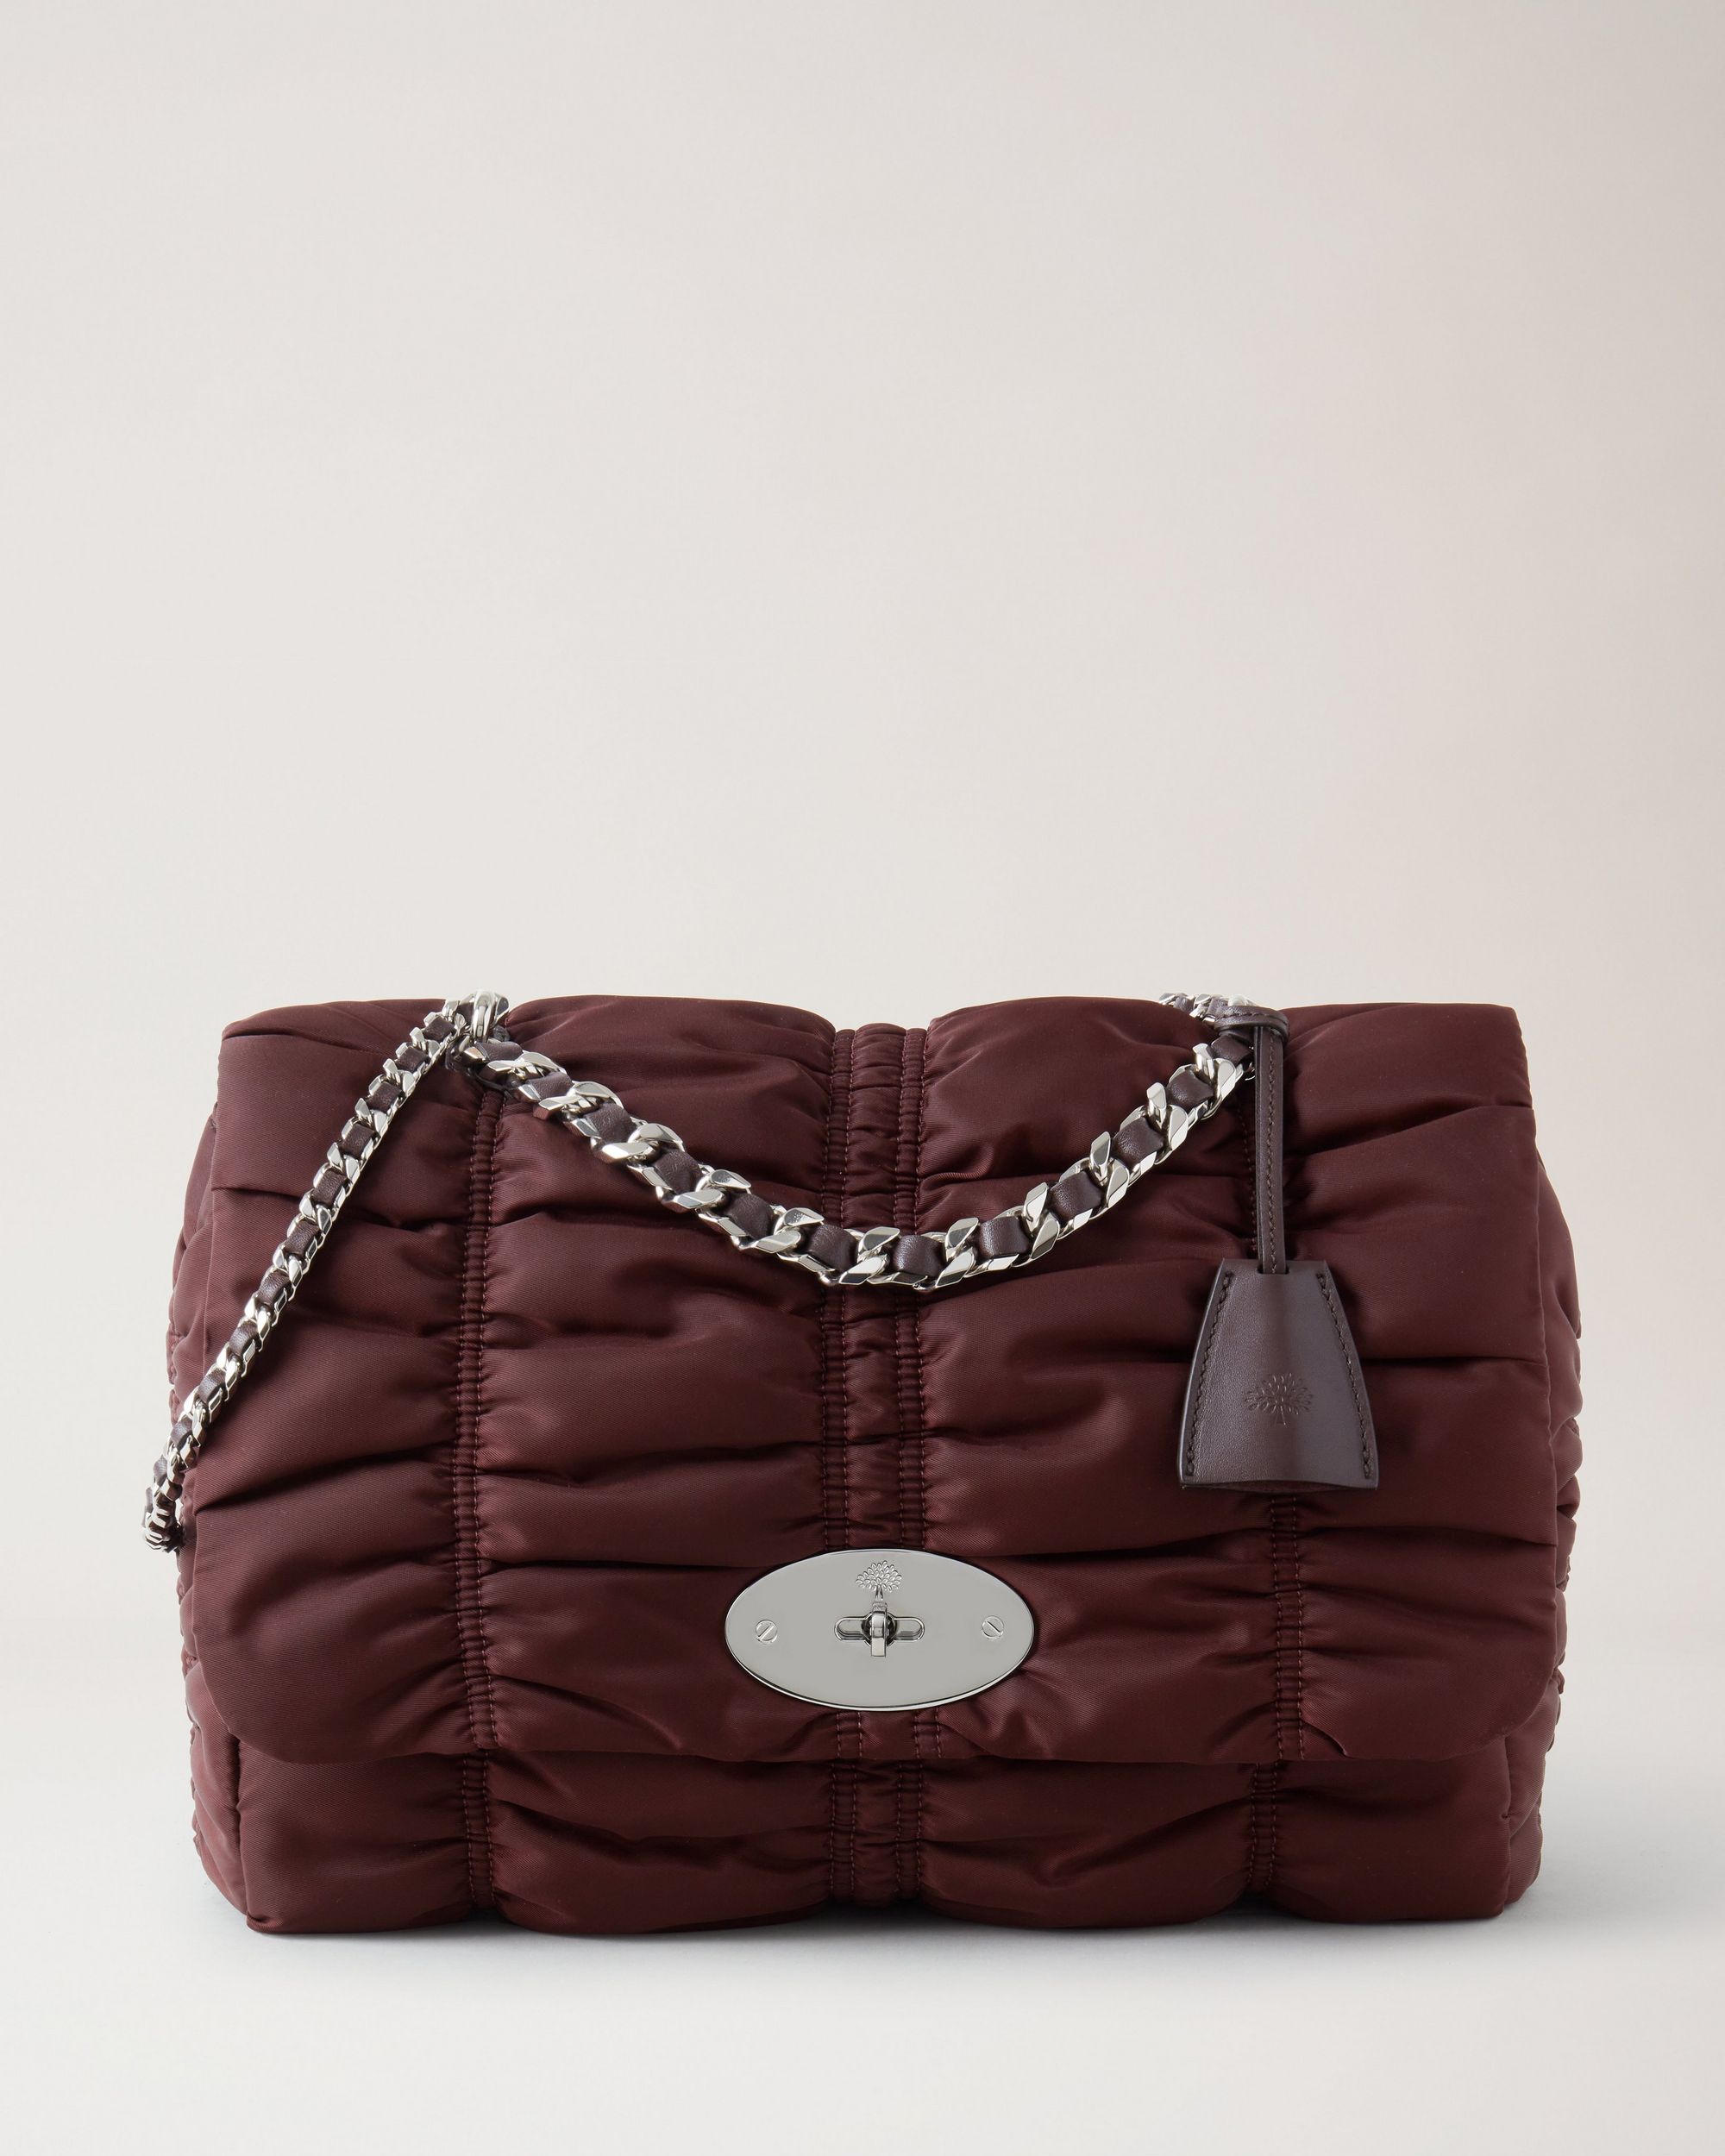 Maroon cushiony bag from Mulberry